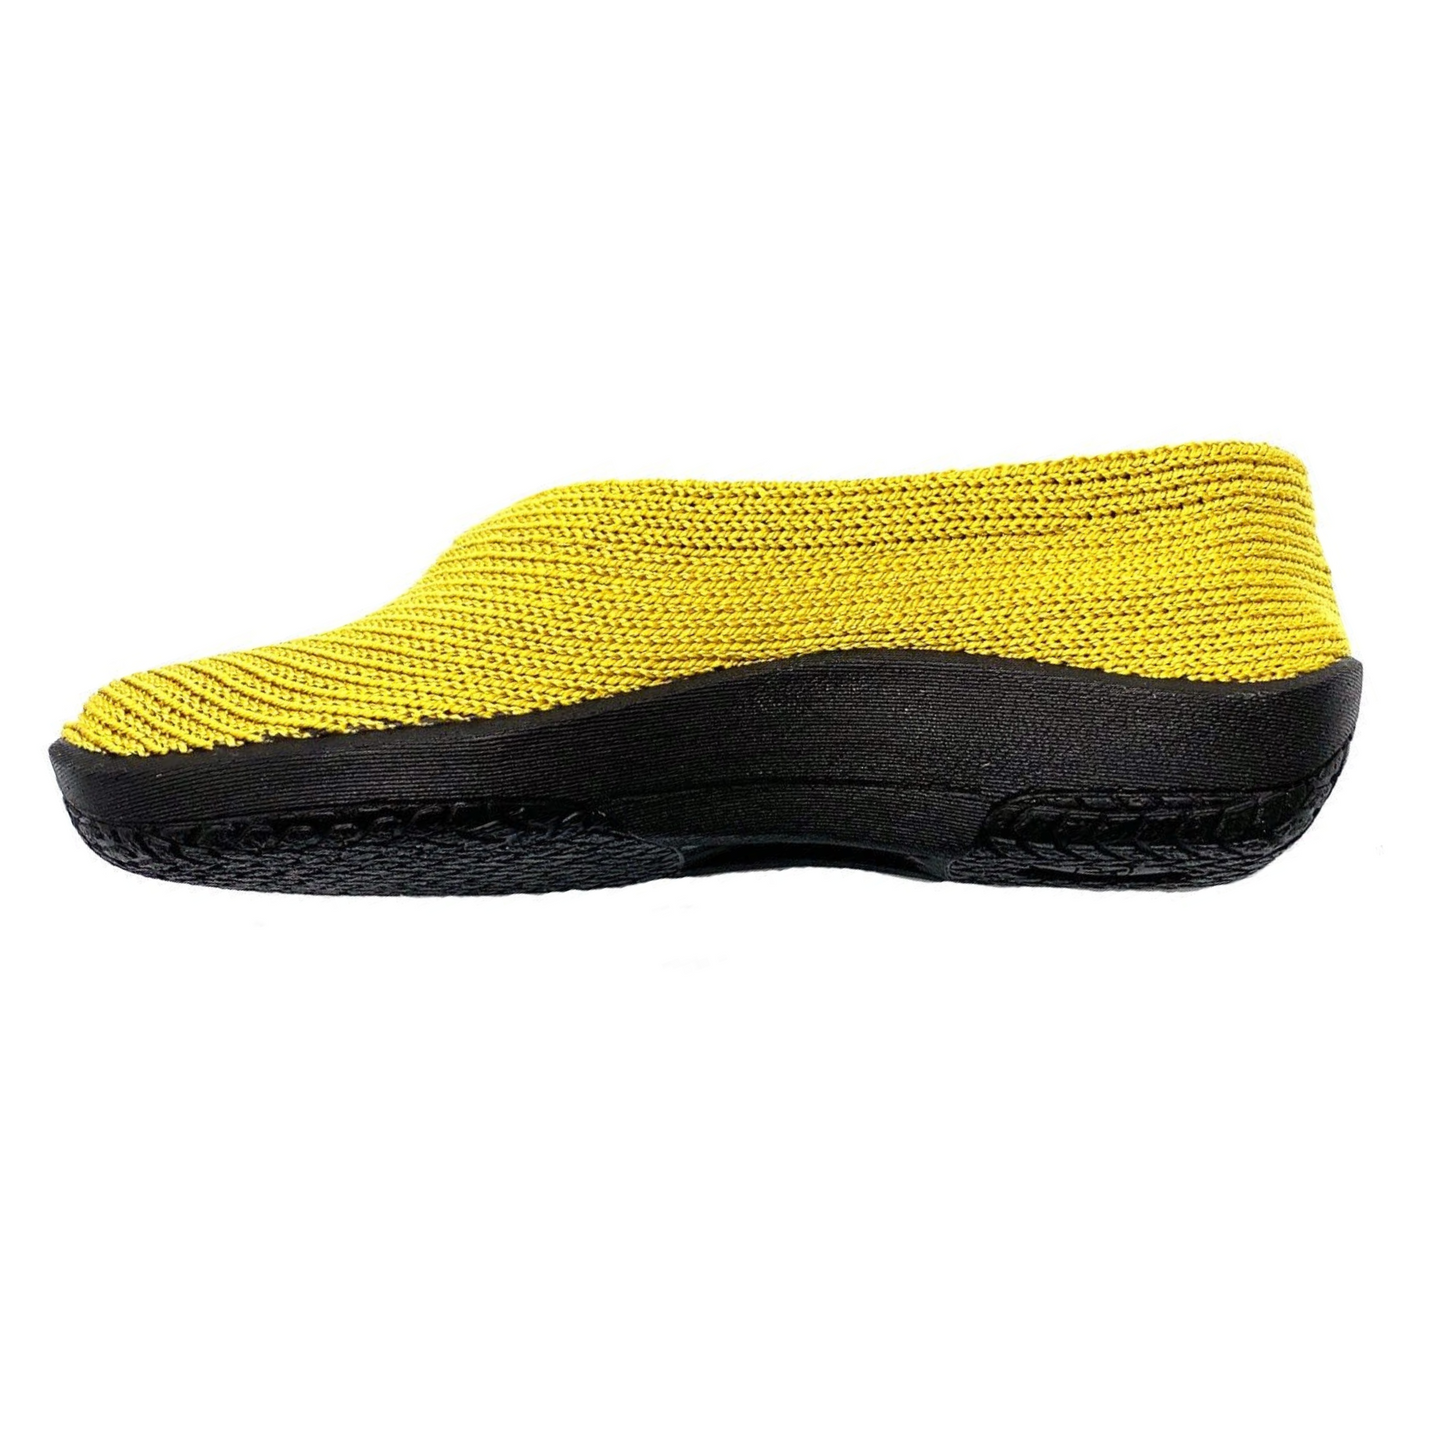 A yellow banana coloured knit shoe is pictured in profile with thick black sole.